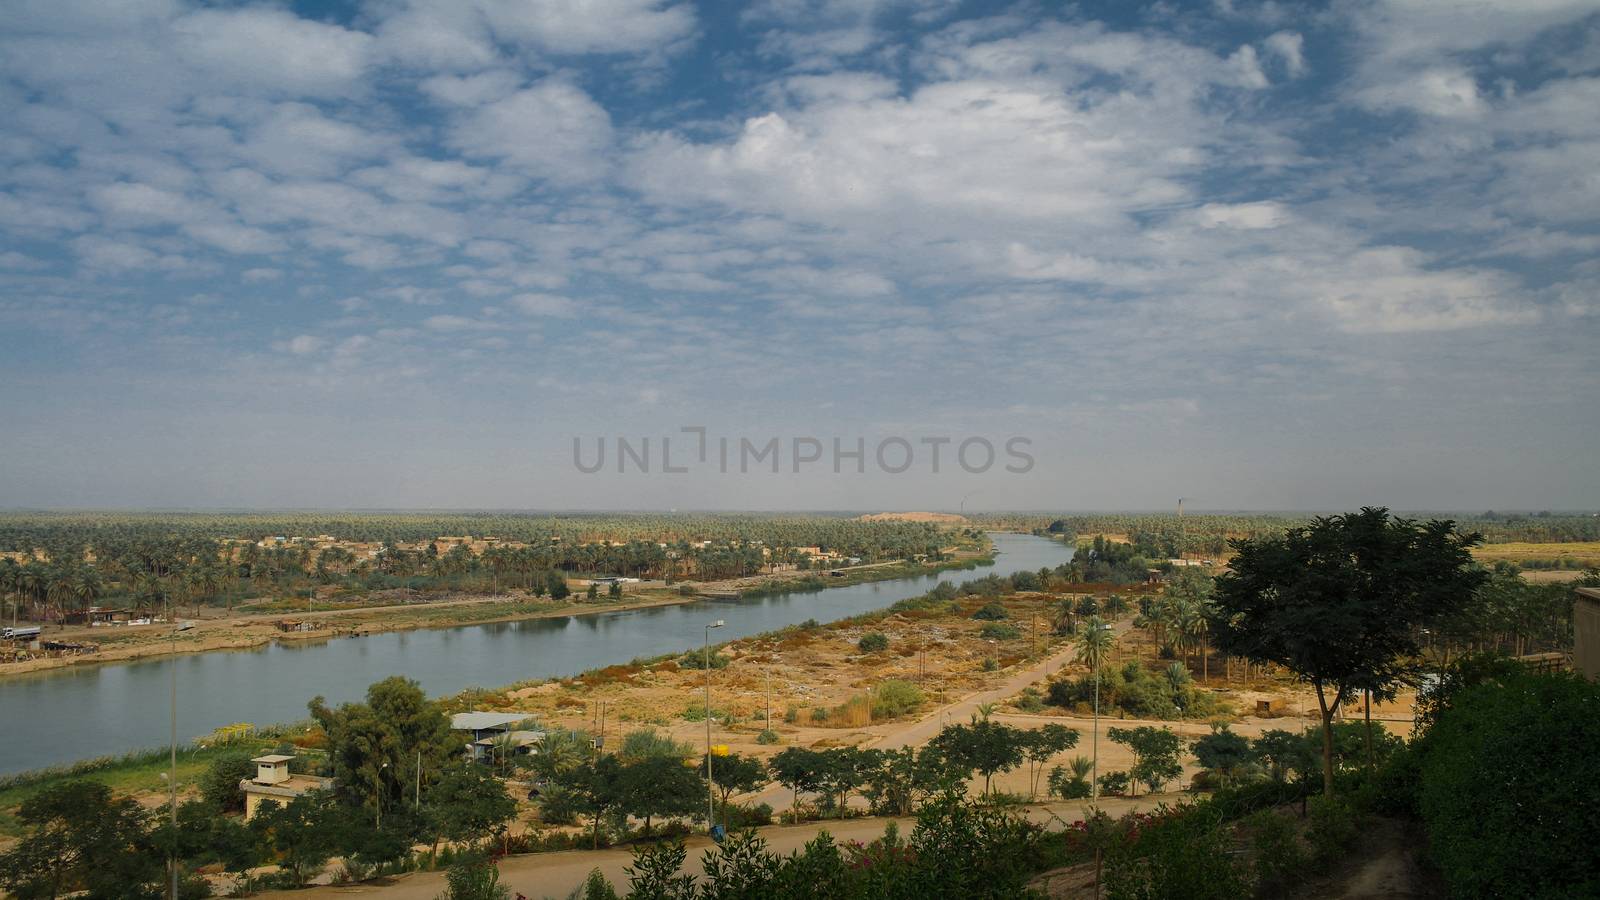 View to Euphrates river from former Saddam Hussein palace, Hillah, Babyl, Iraq